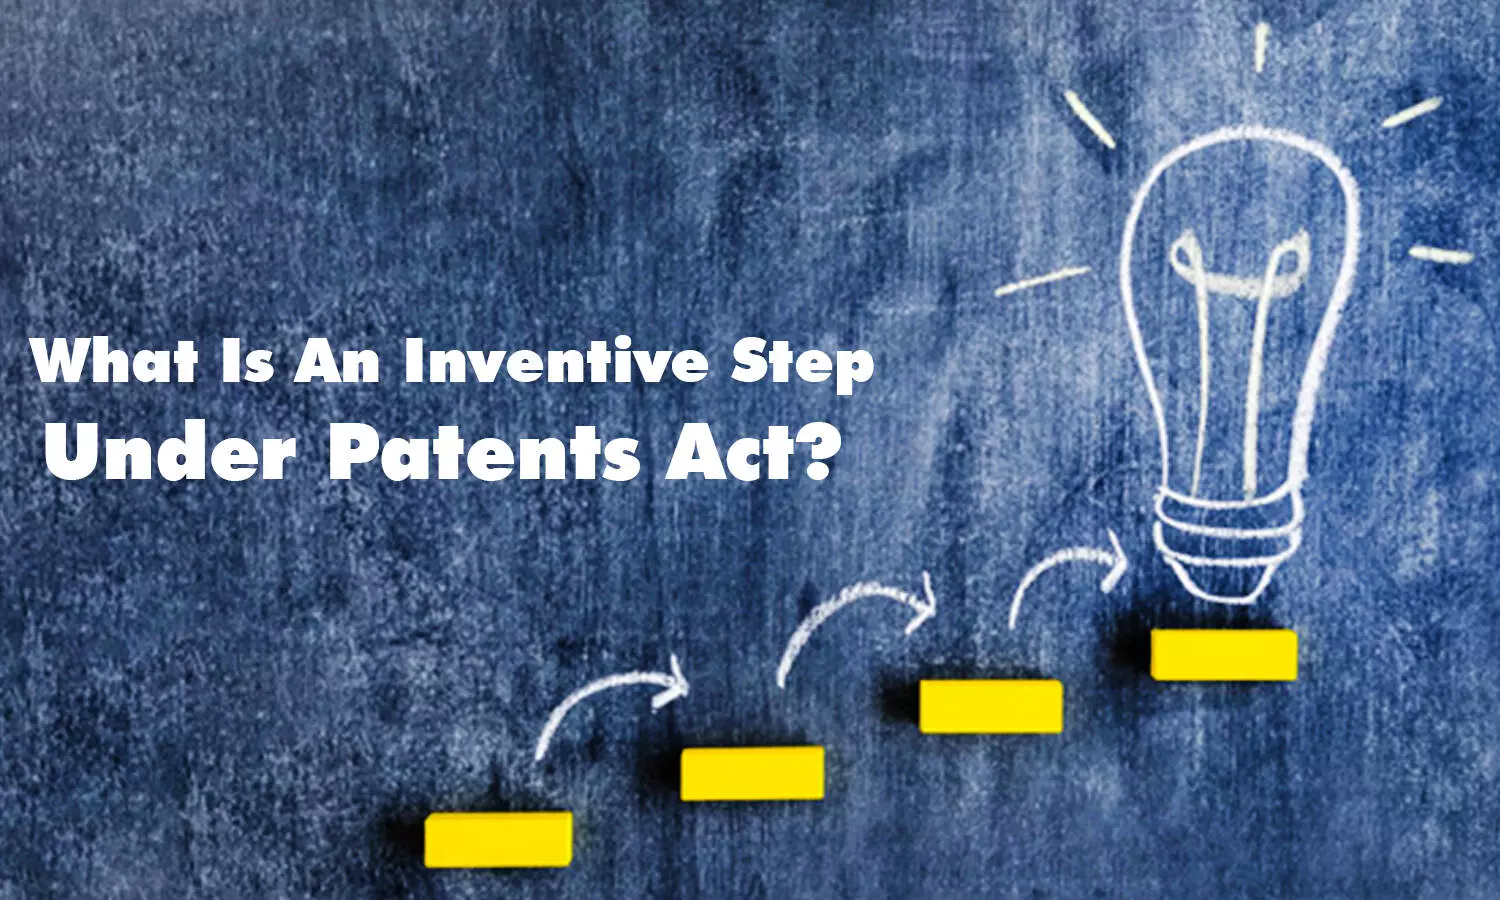 Inventive step under the Patents Act